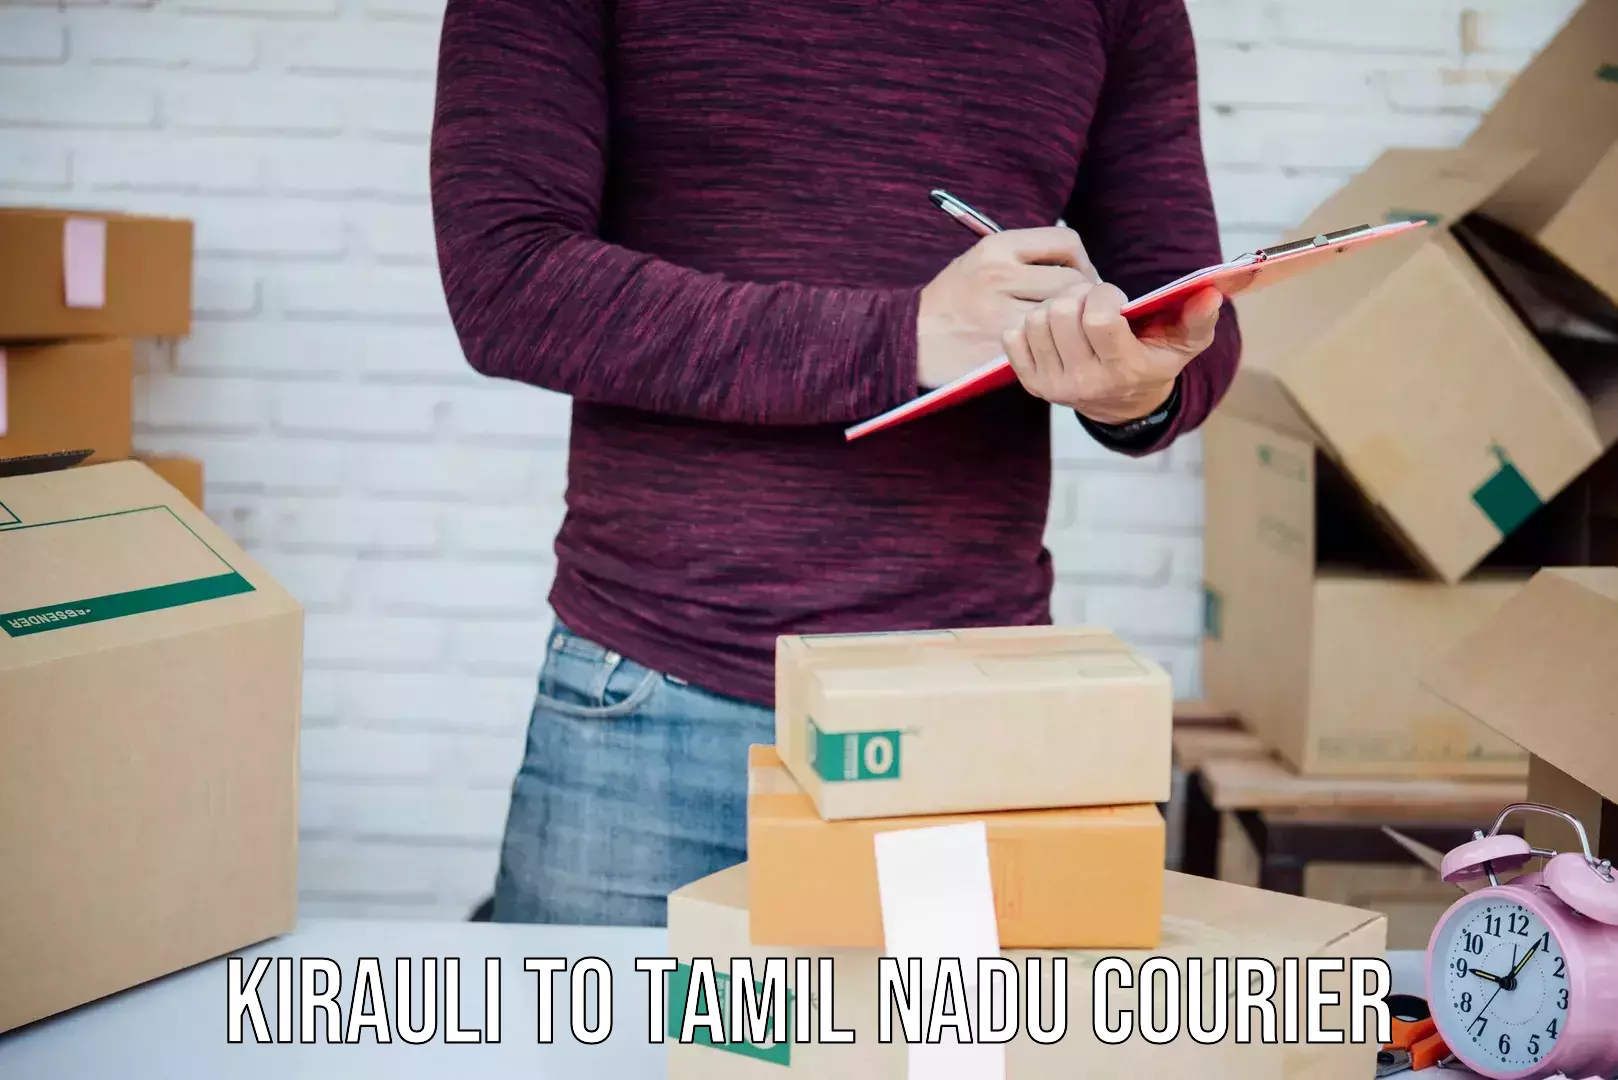 Quality courier services Kirauli to Tamil Nadu